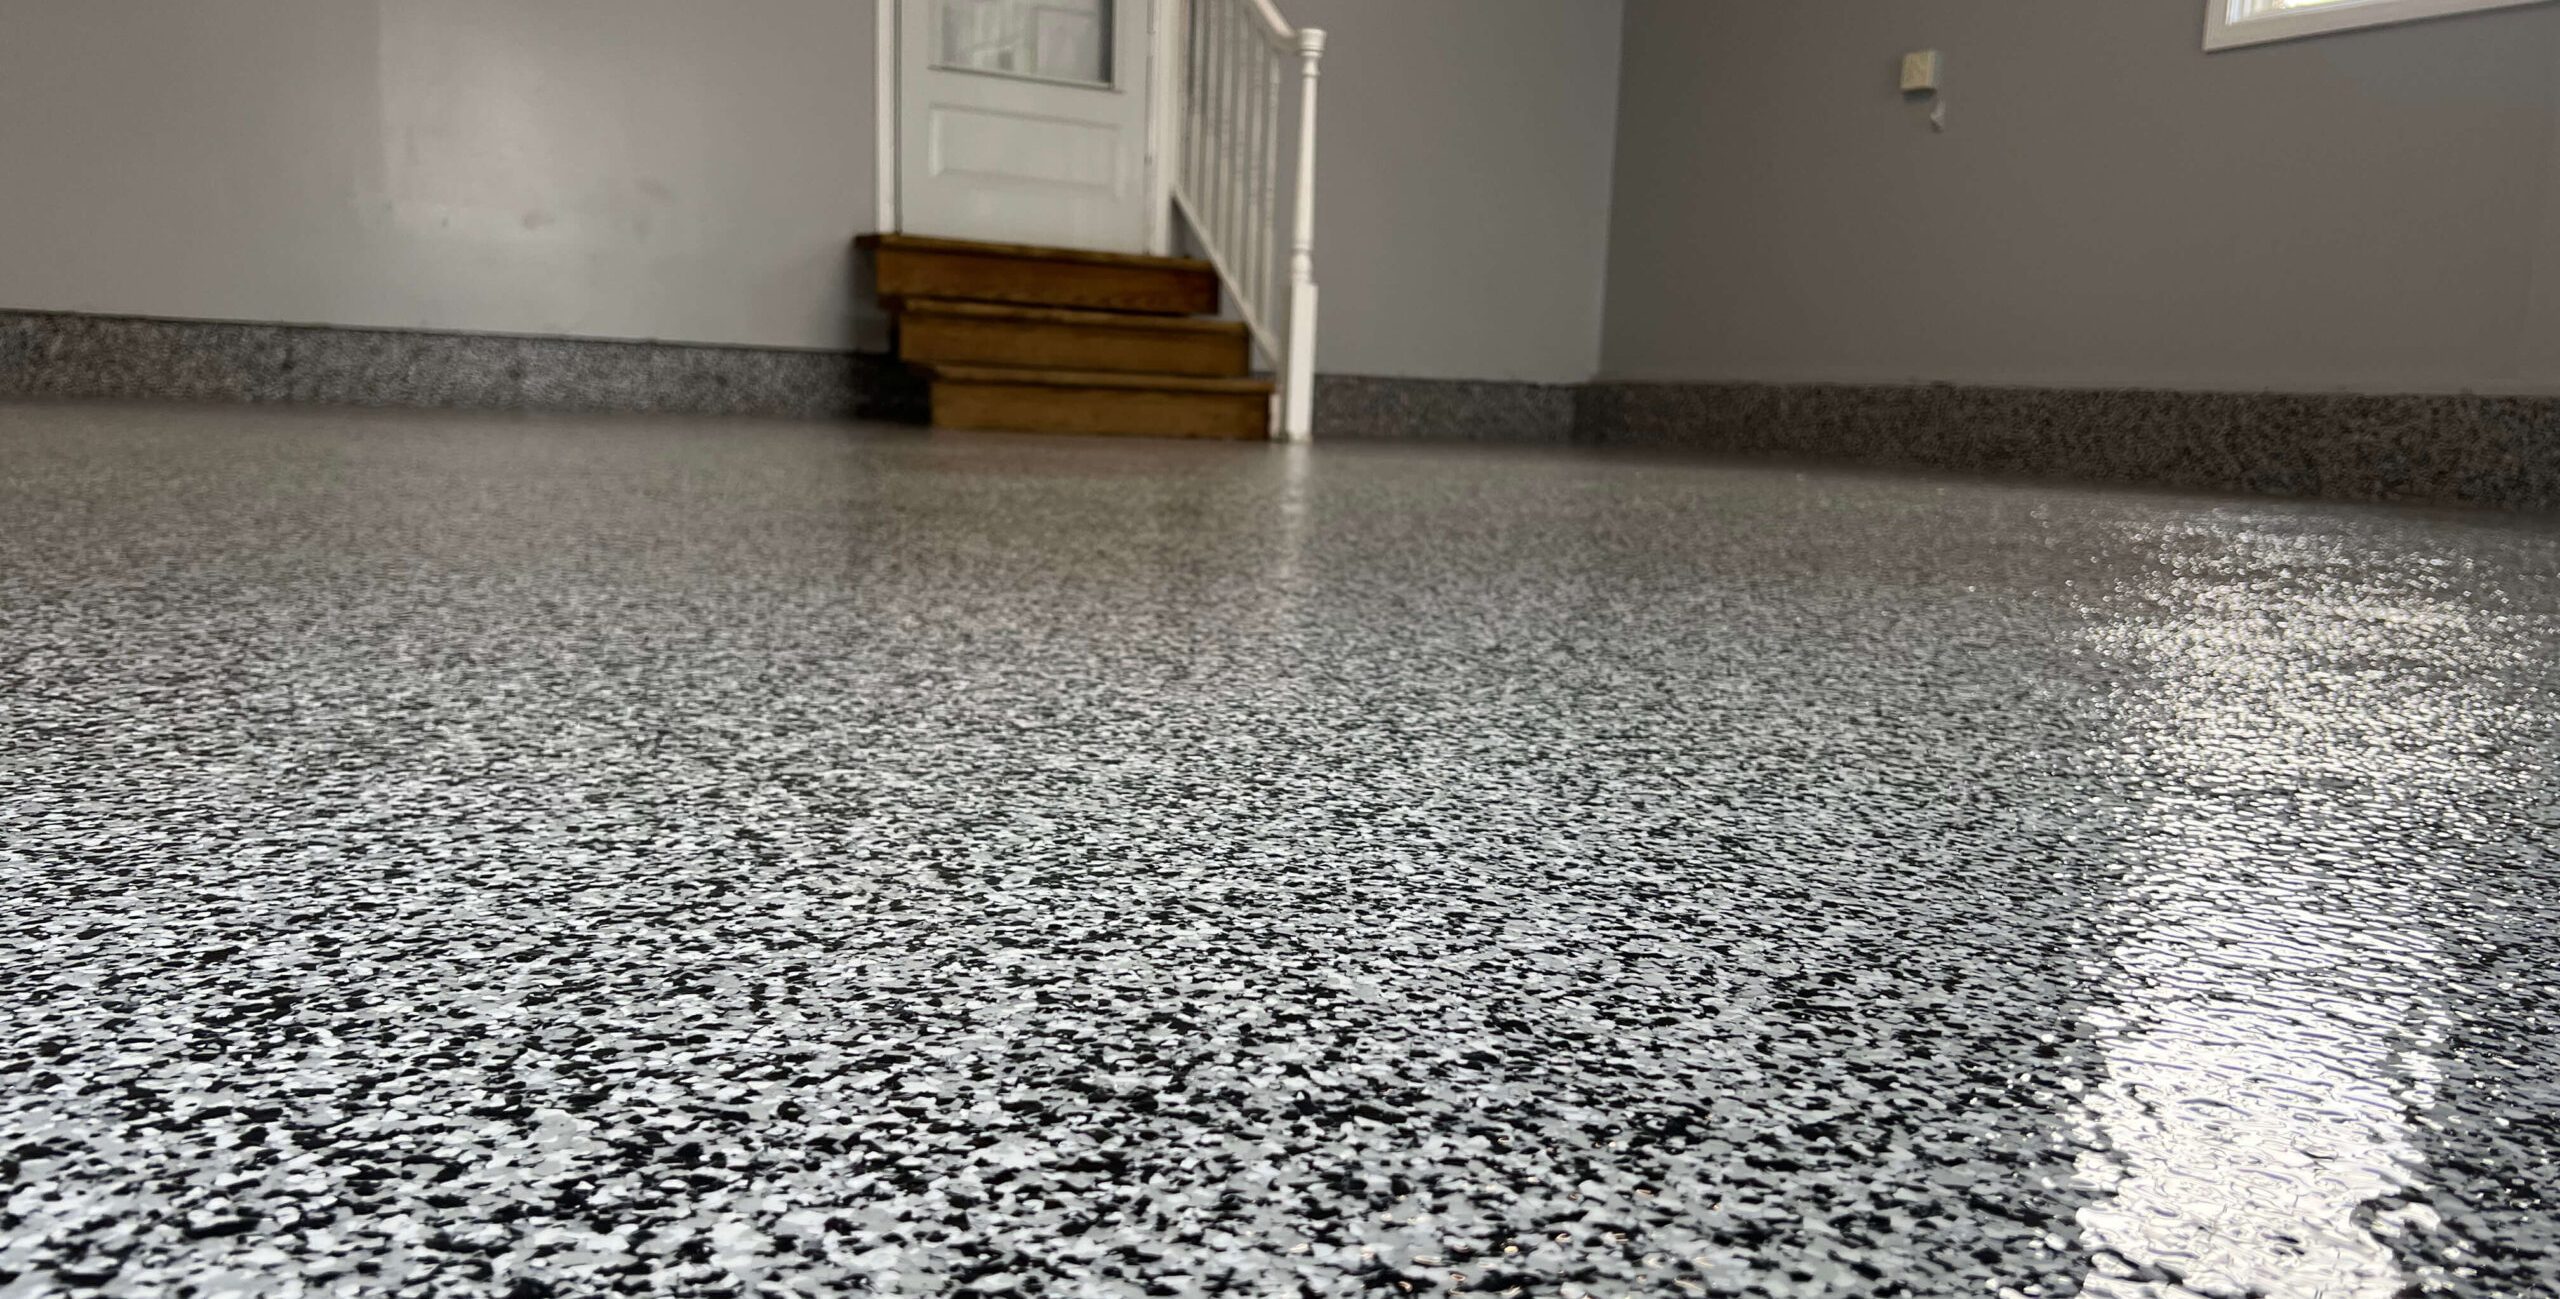 Personalize Your Space With Global Garage Flooring Contractors"